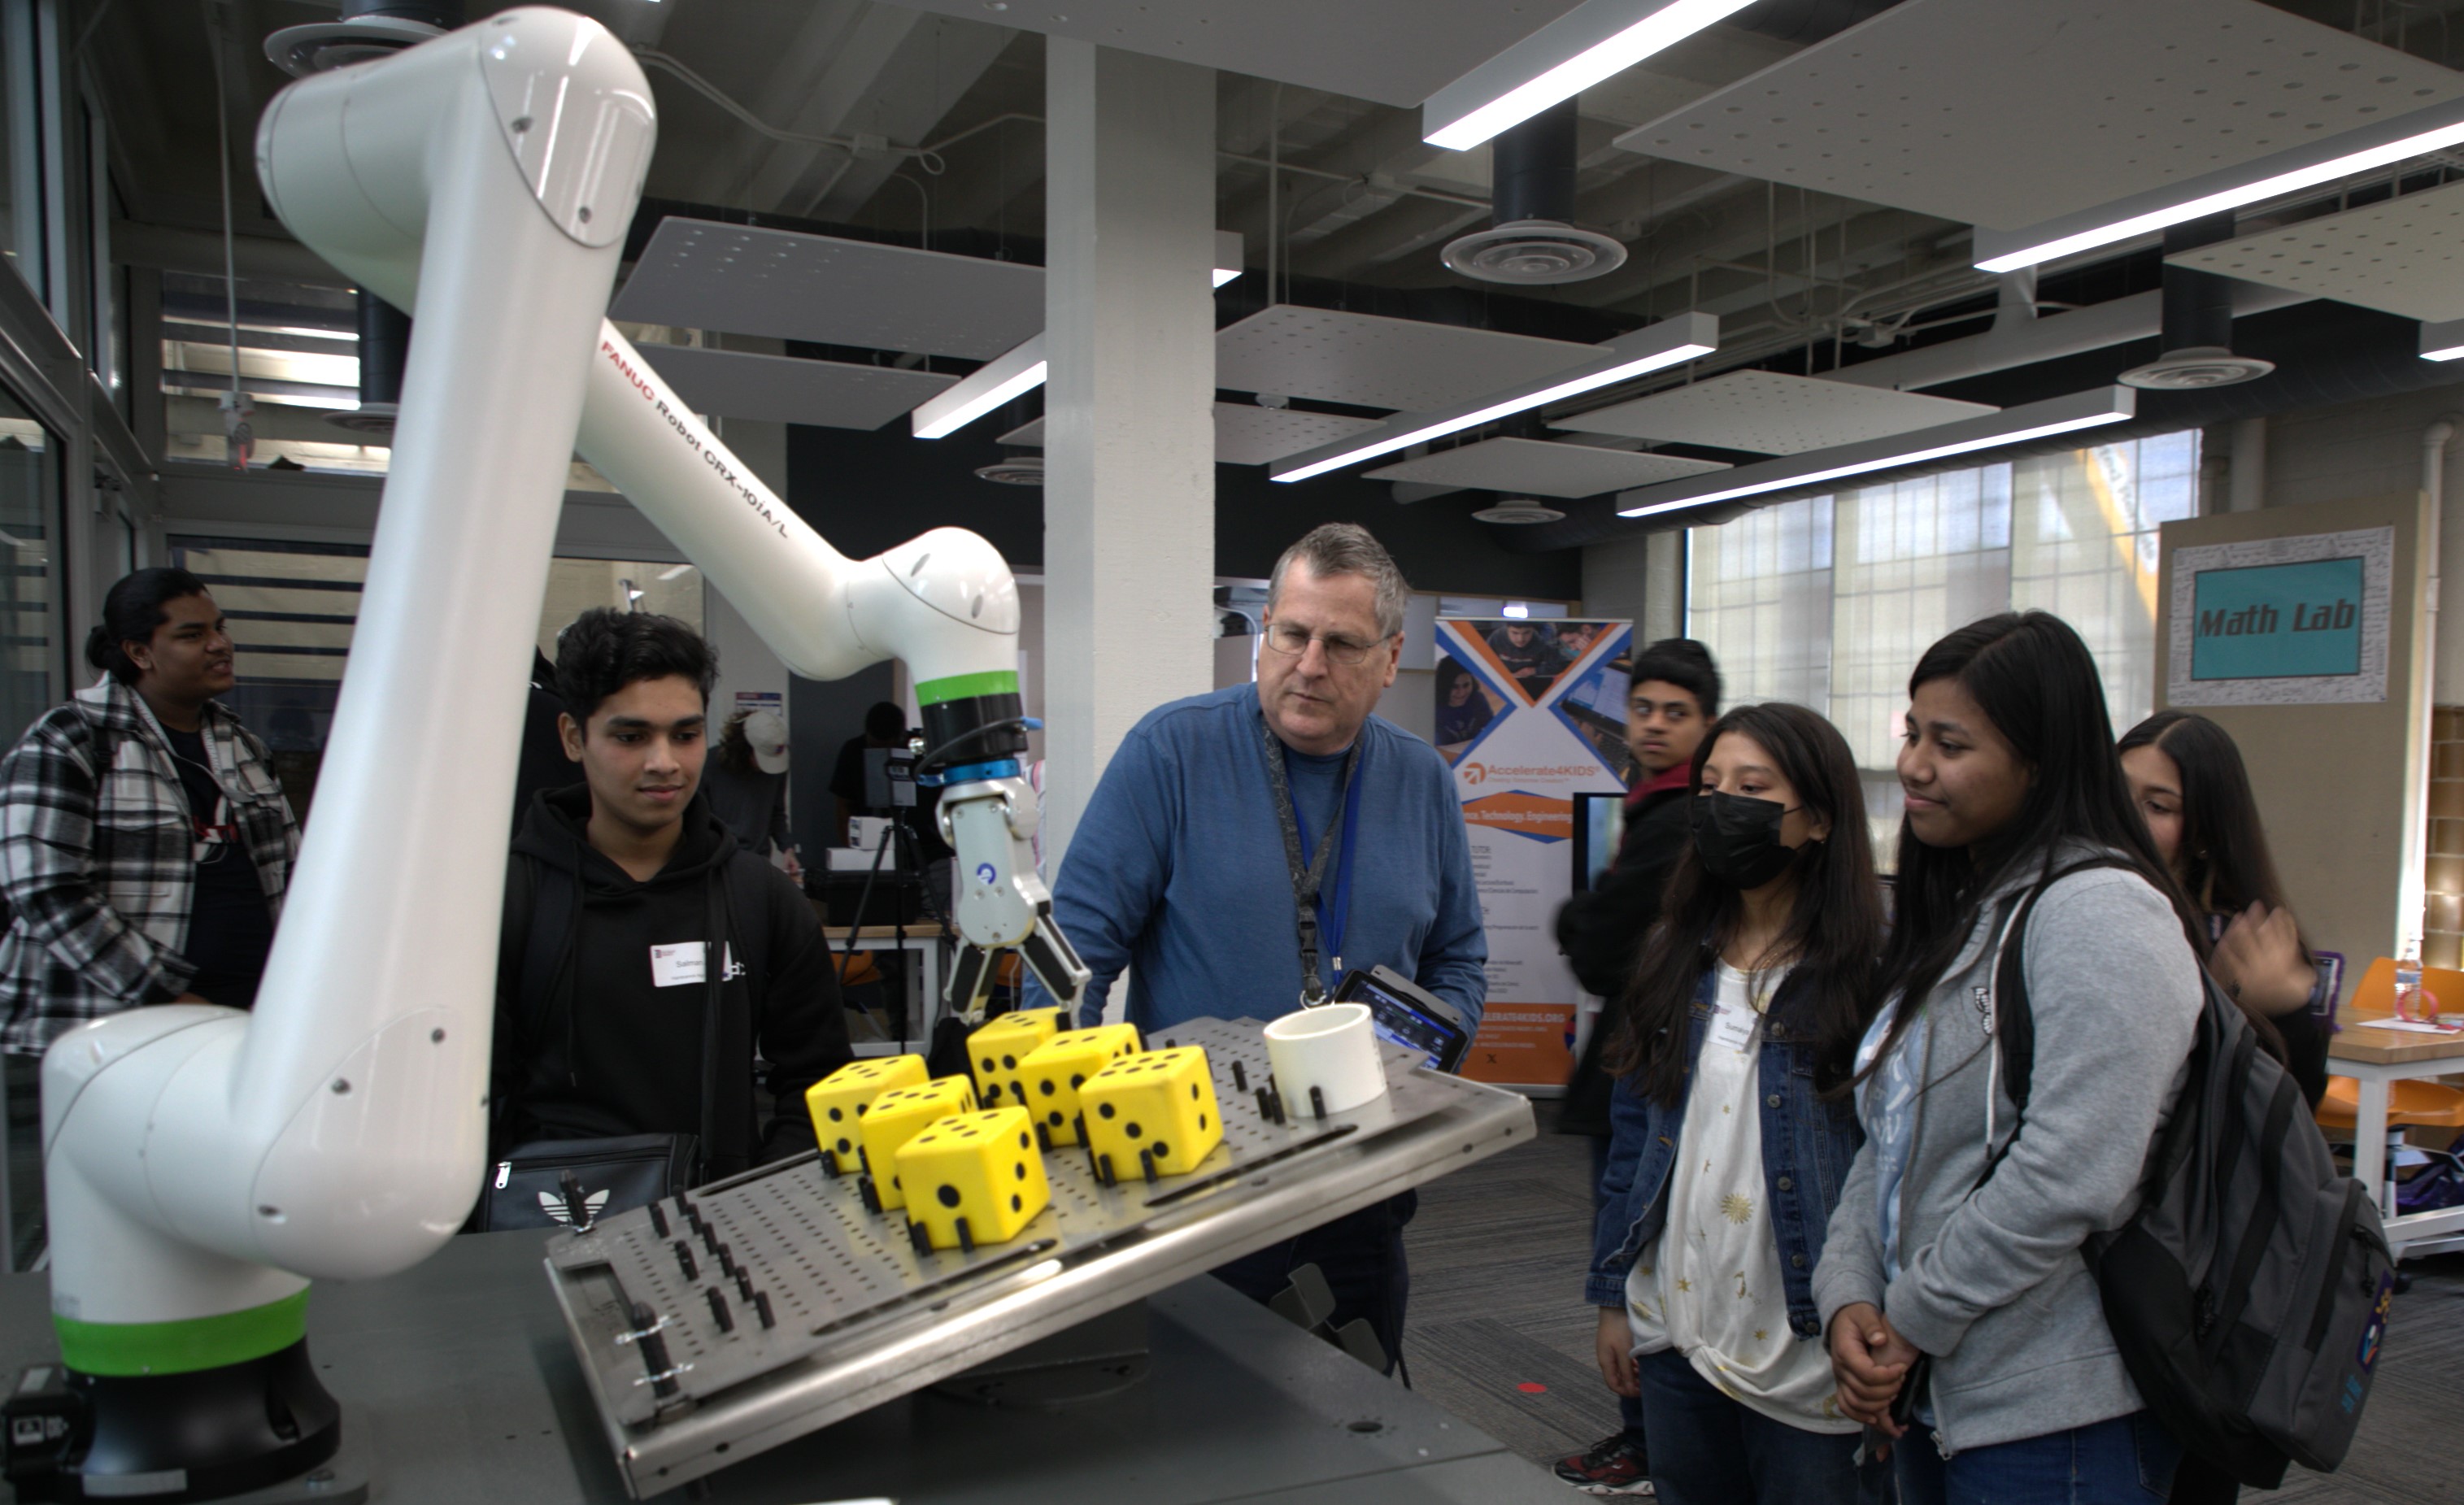 Professor showing high school students how to operate a robotic arm